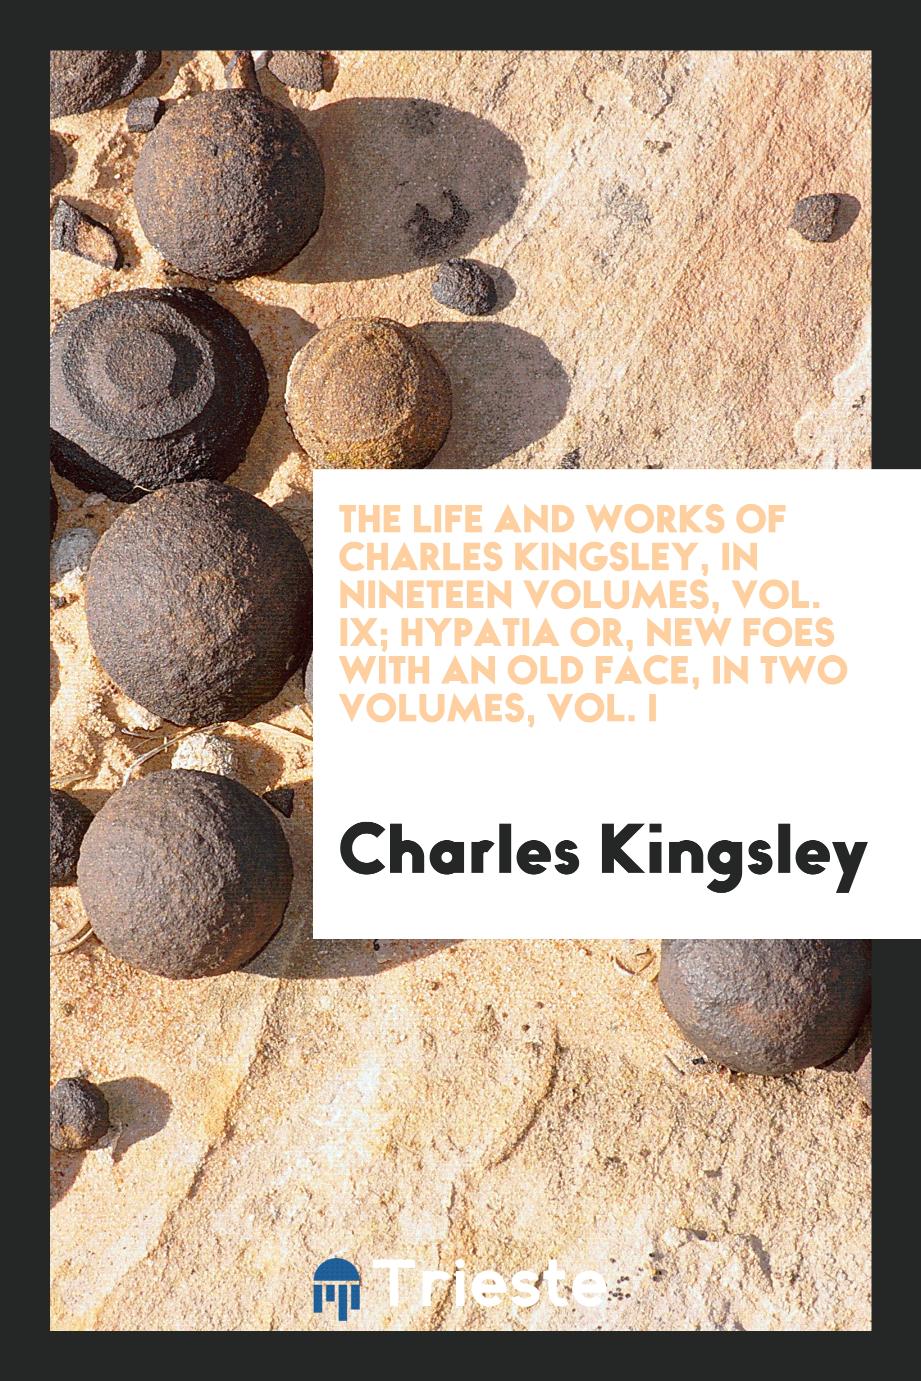 The Life and Works of Charles Kingsley, in Nineteen Volumes, Vol. IX; Hypatia or, New Foes with an Old Face, in Two Volumes, Vol. I